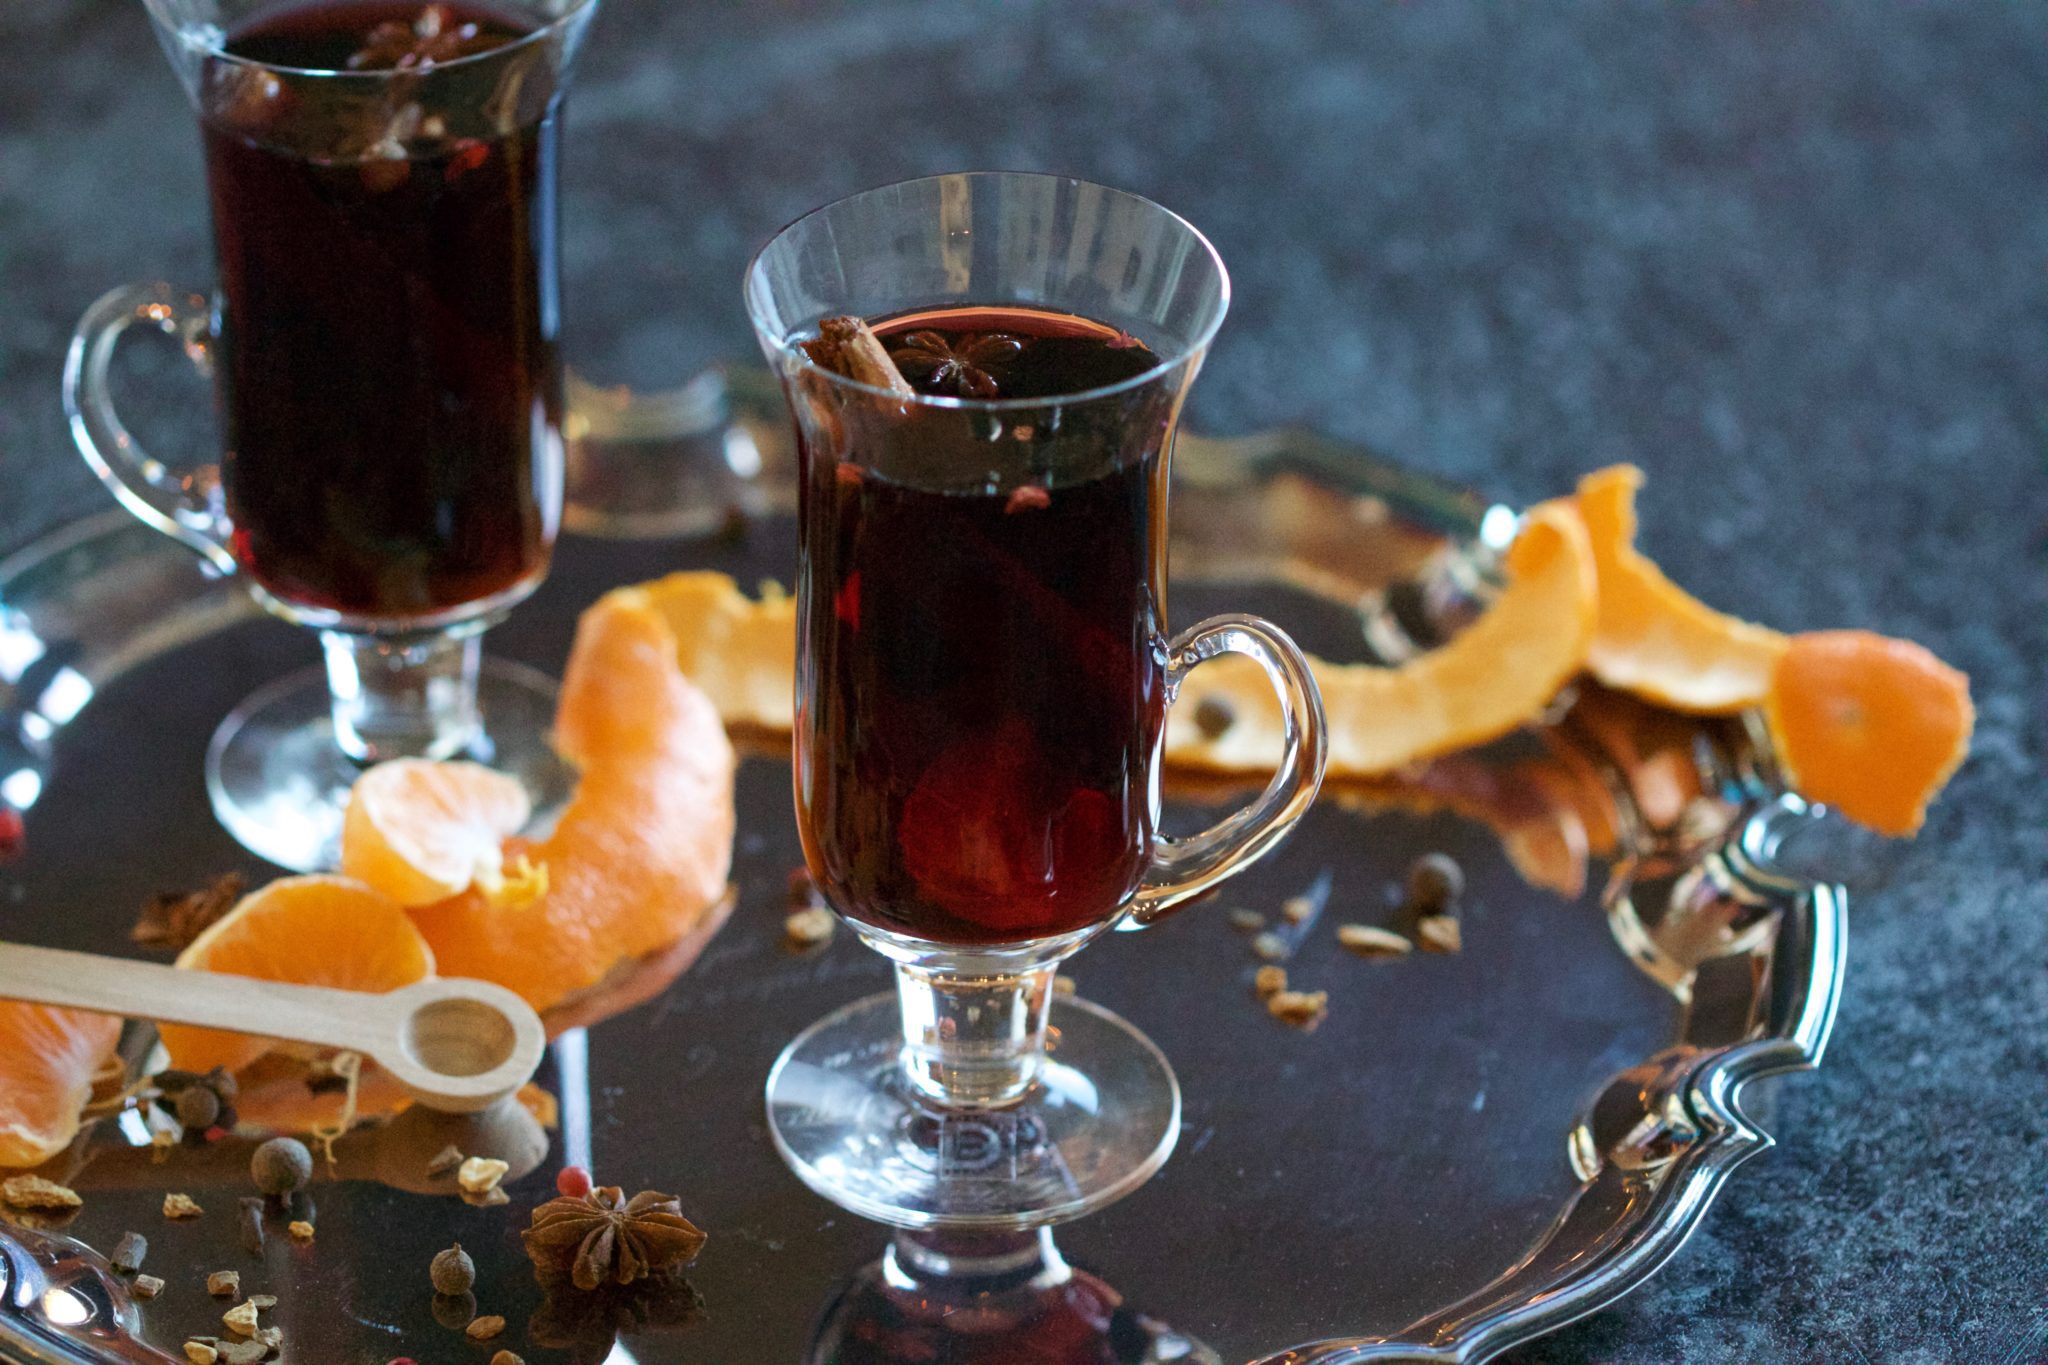 Mmm... spiced or mulled wine? Delicious and makes a great social media post idea for the holidays.